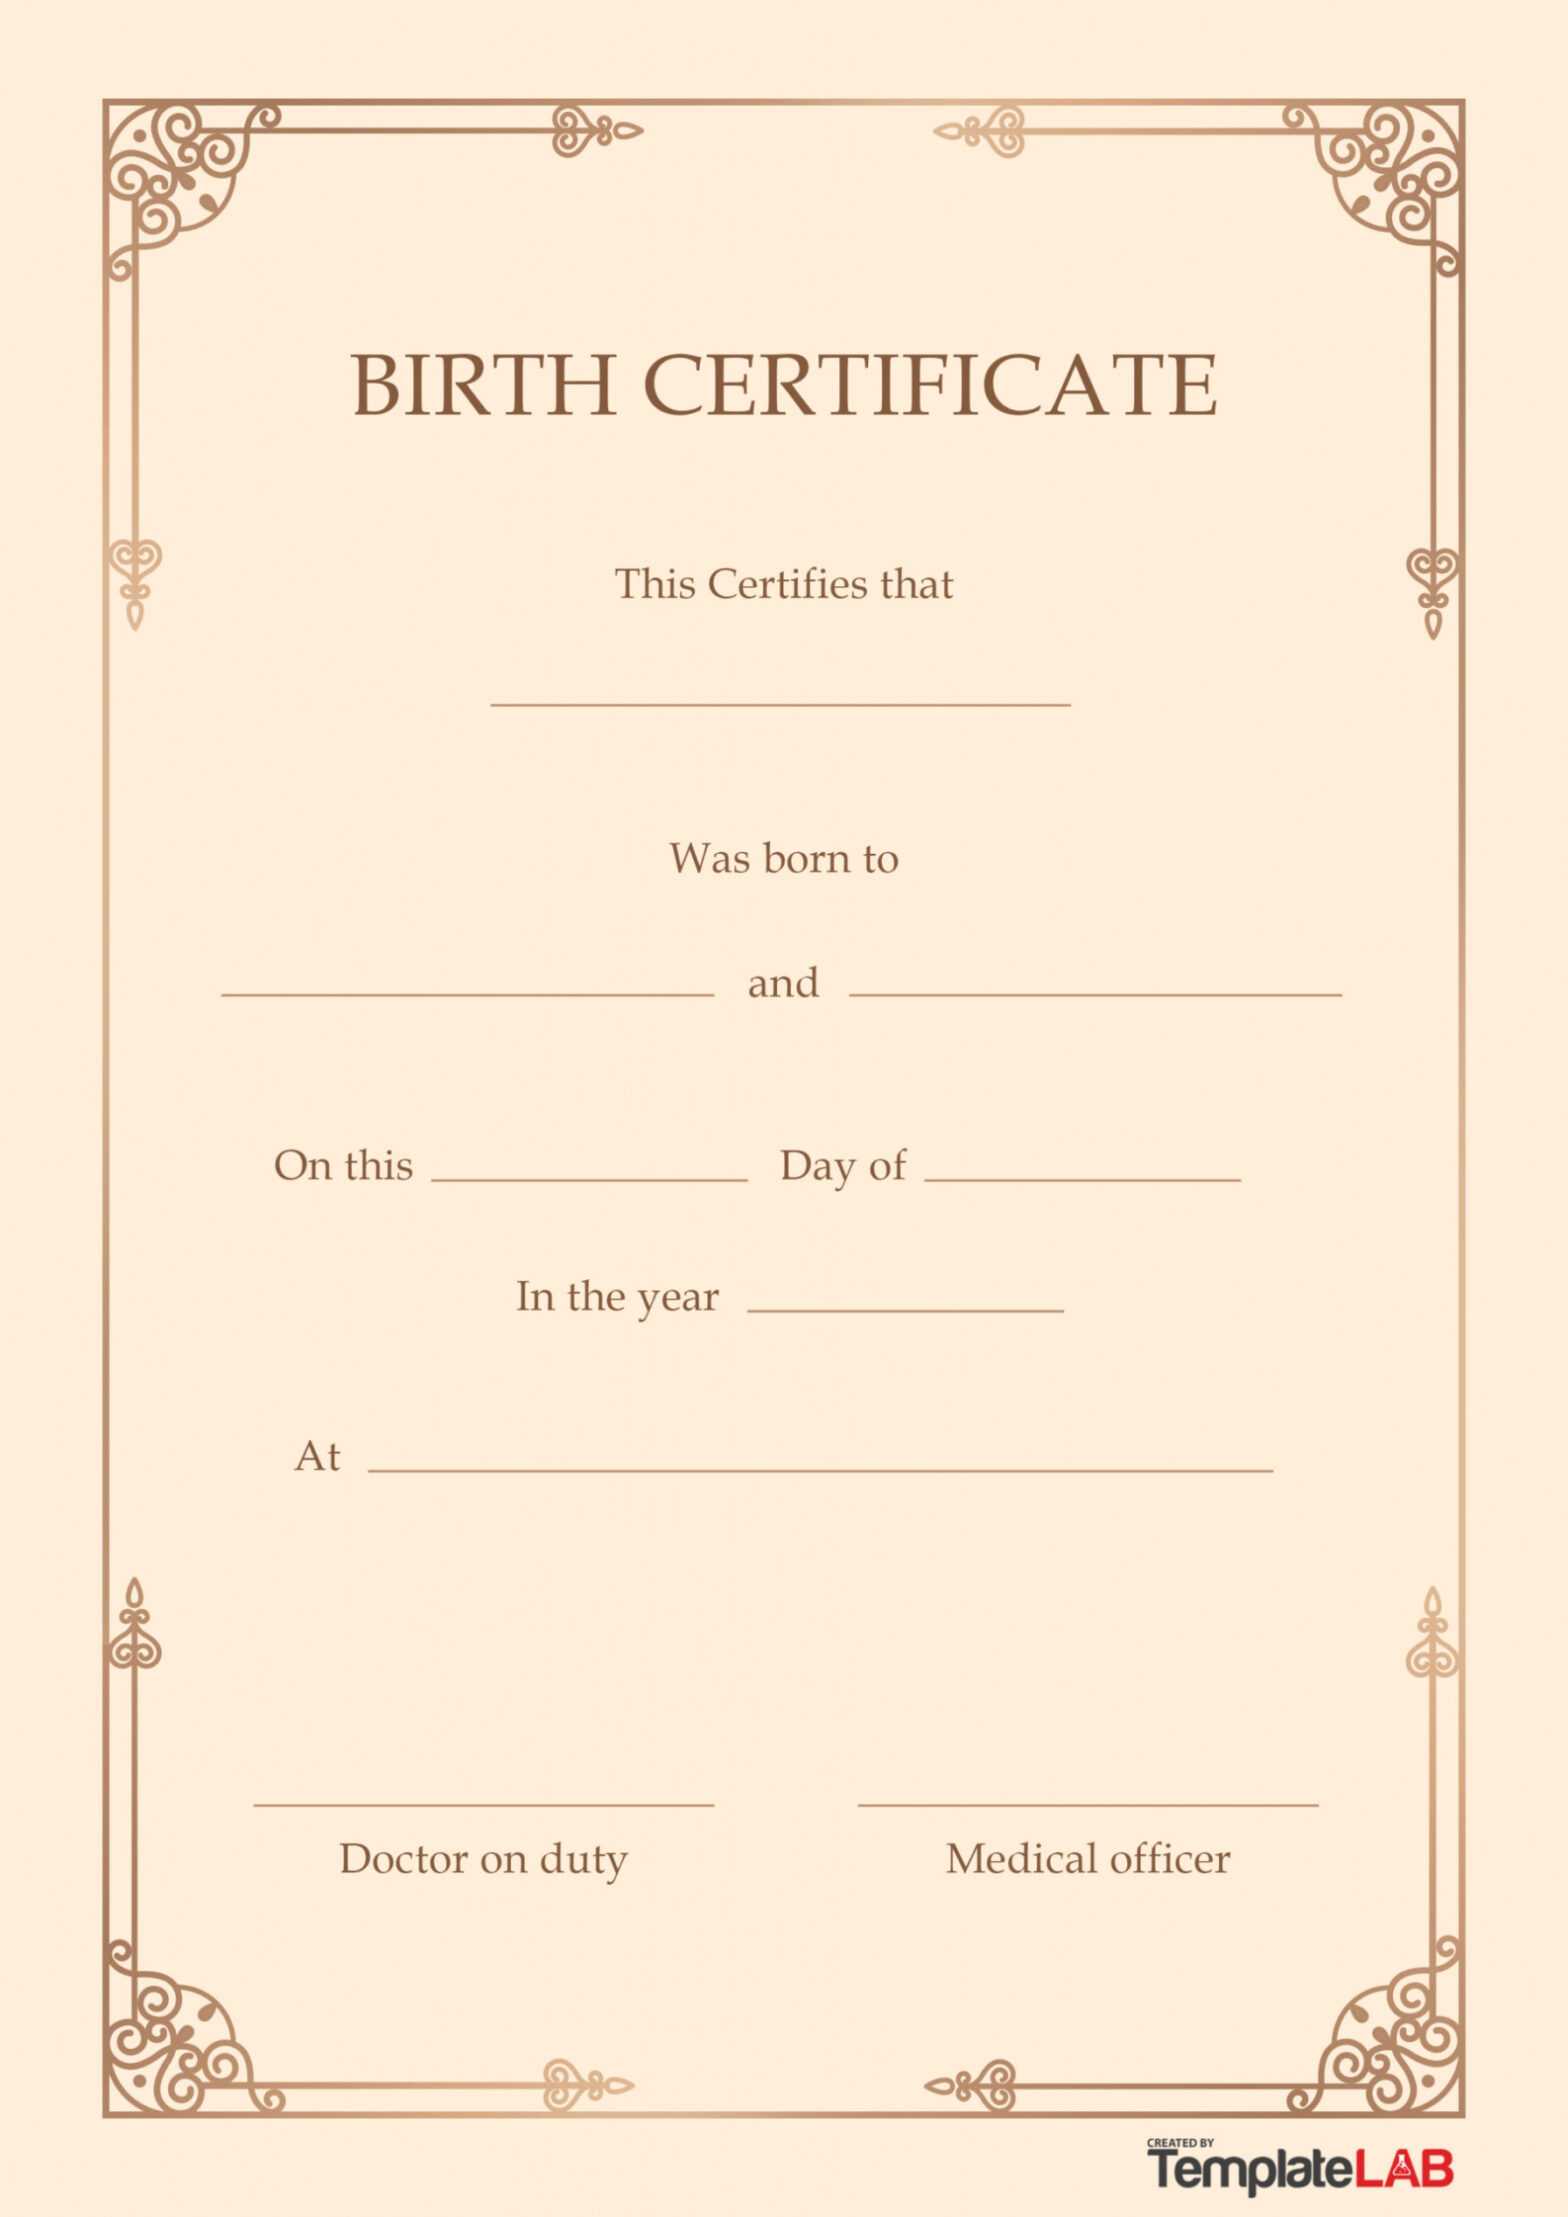 15 Birth Certificate Templates (Word &amp; Pdf) ᐅ Templatelab with regard to Editable Birth Certificate Template